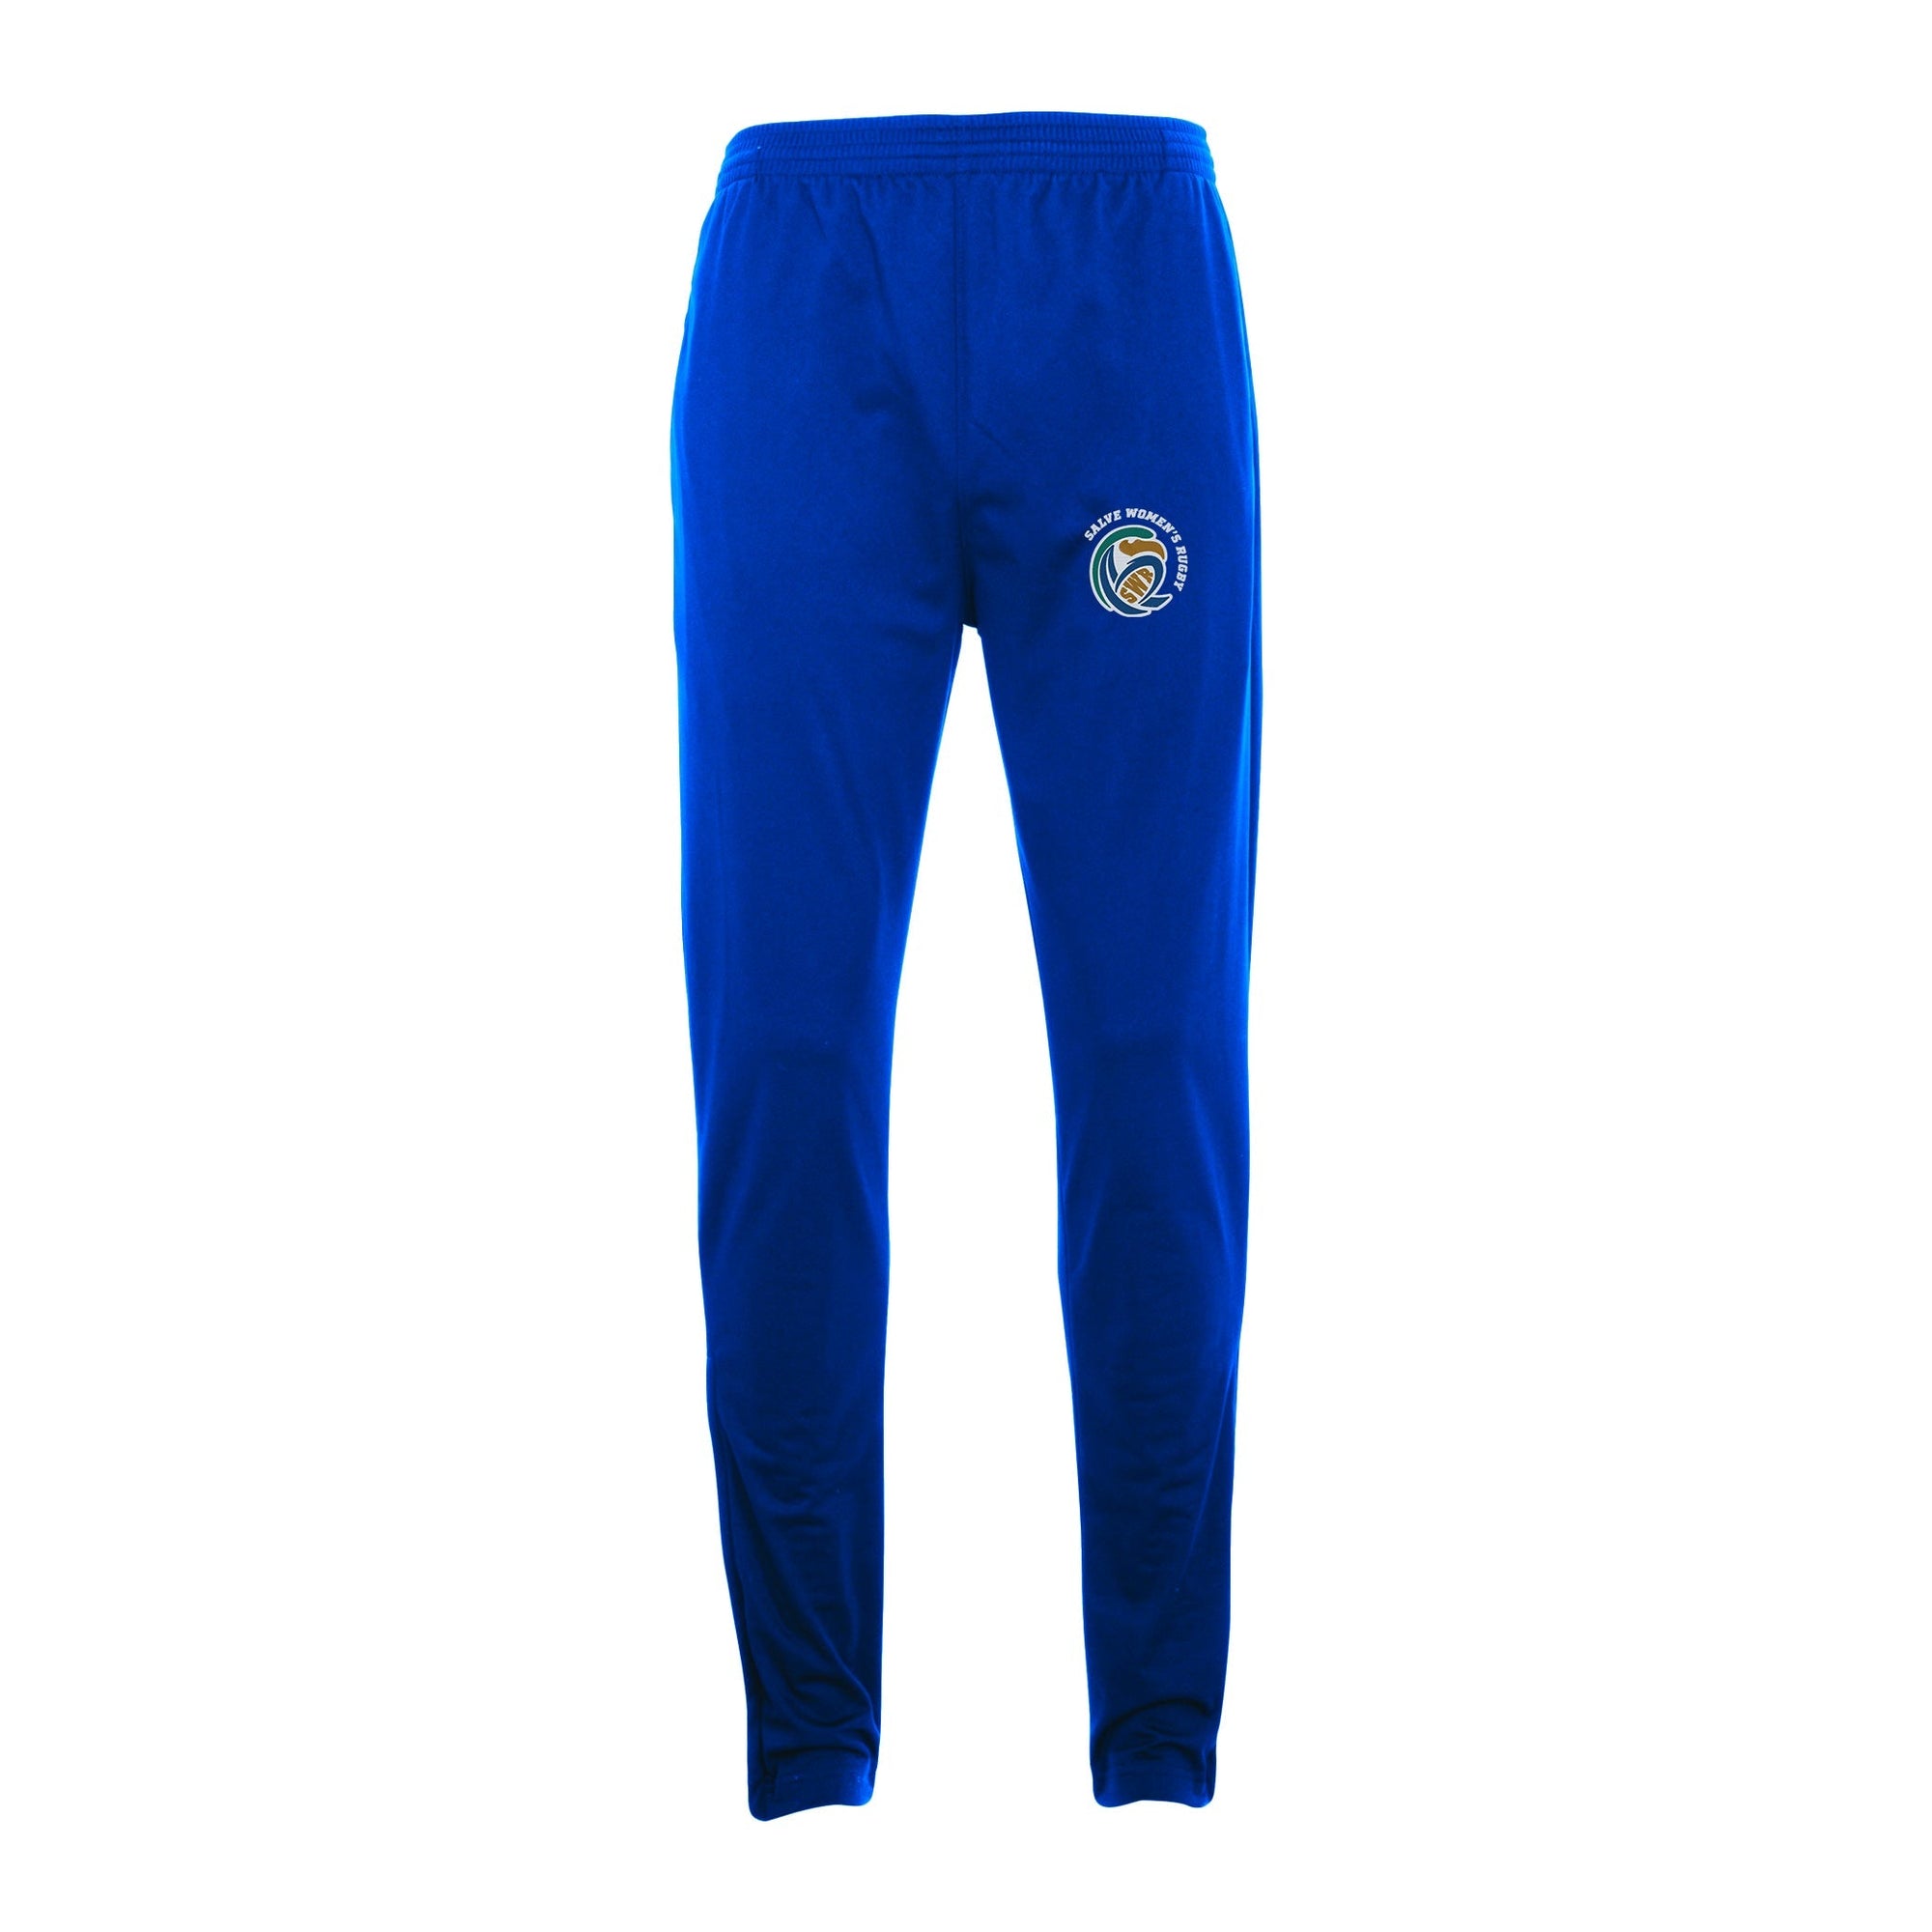 Rugby Imports Salve WR Unisex Tapered Leg Pant